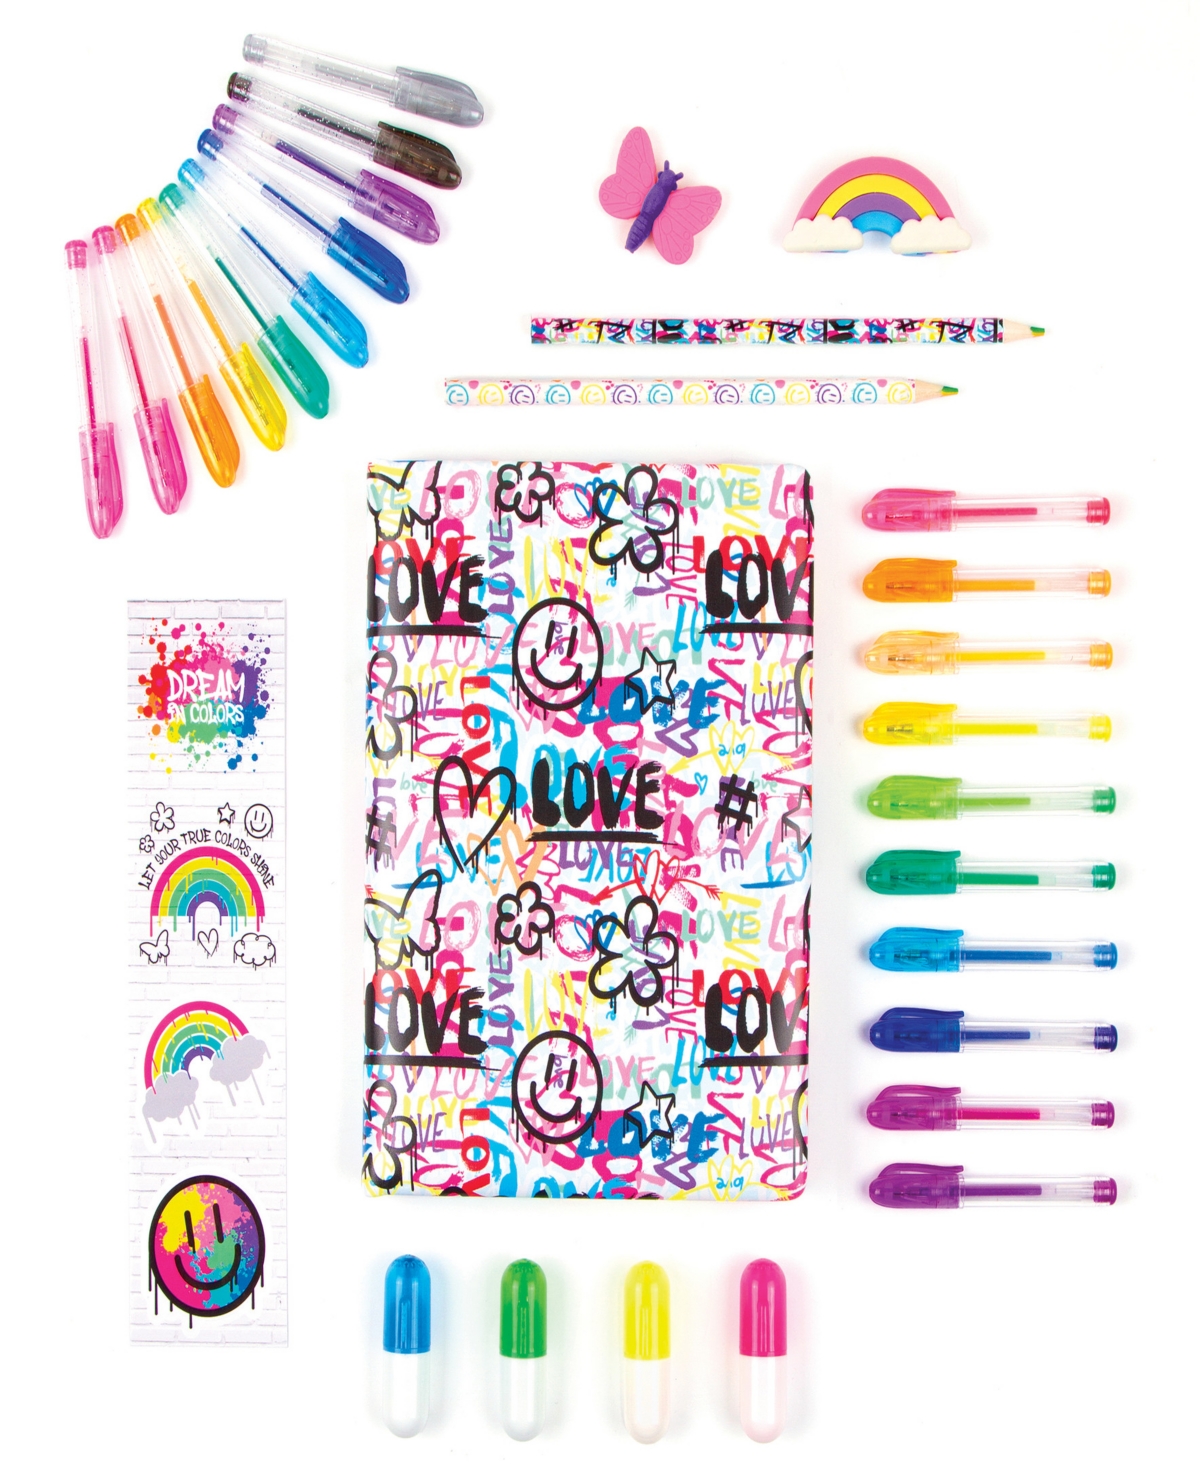 Shop Three Cheers For Girls 3c4g: Street Style Stationery 30 Piece Set, Make It Real, Teens Tweens Girls, 160 Page Lined Journal In Multi